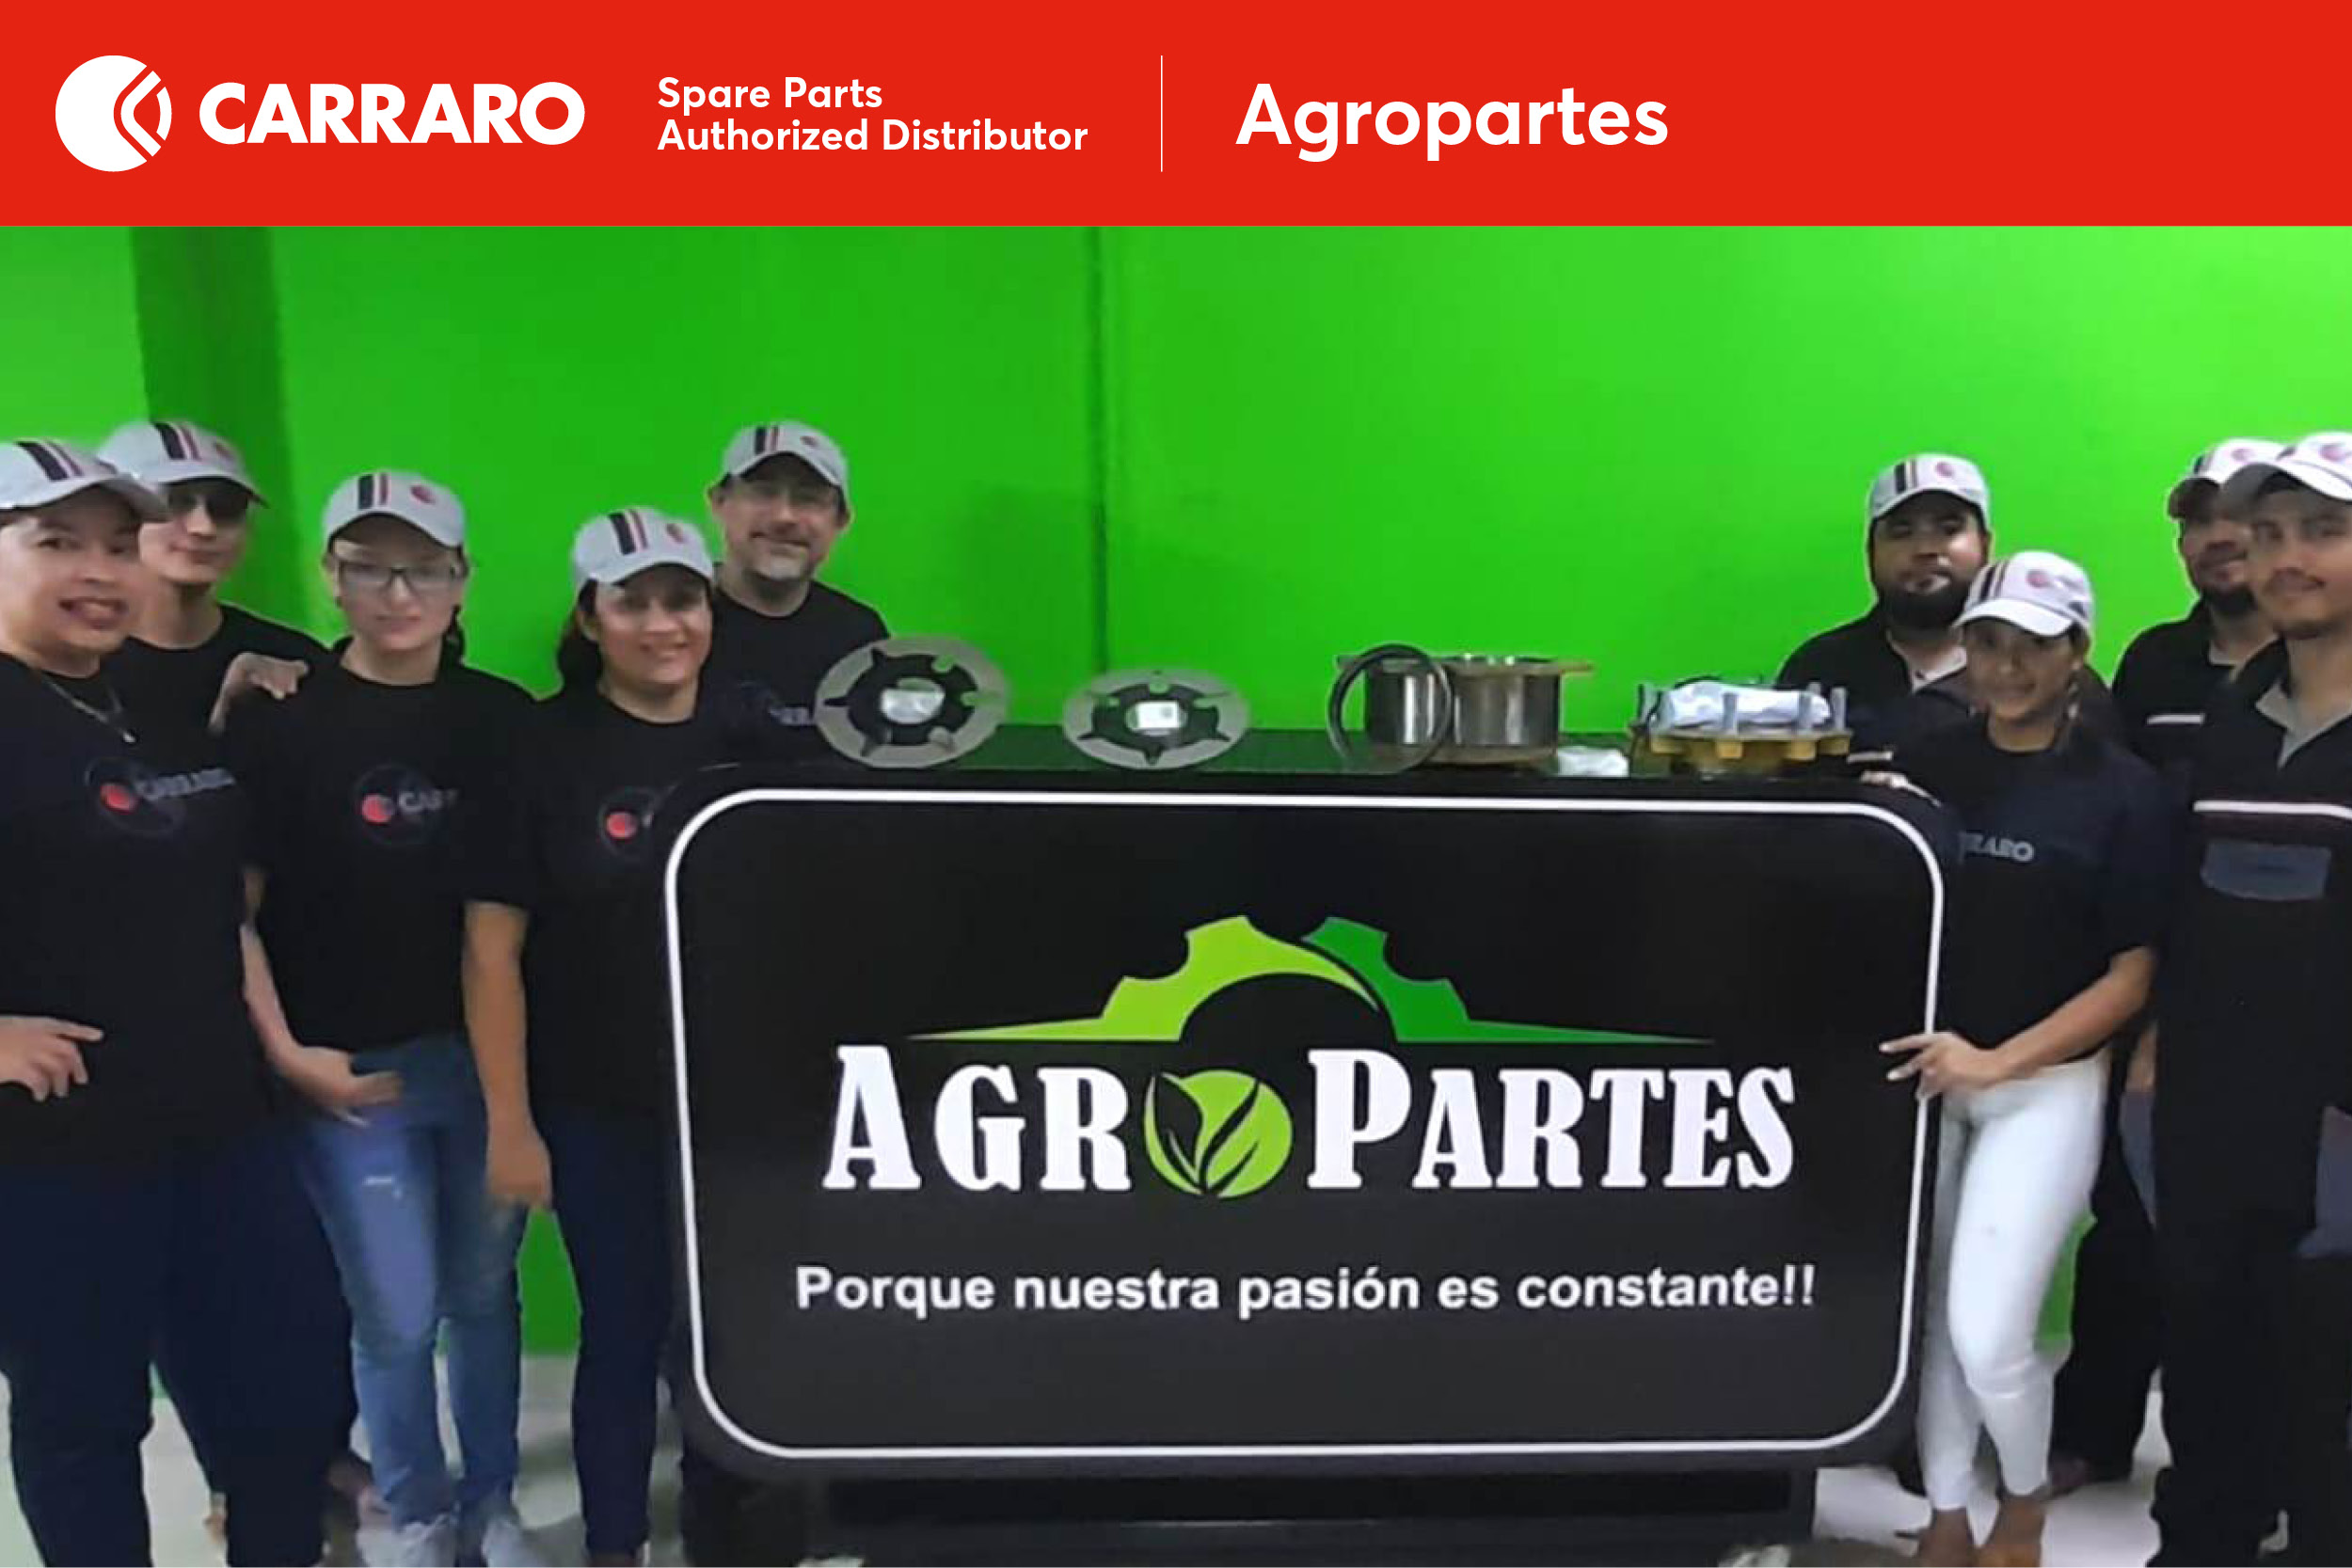 New collaboration in Nicaragua with Agropartes!